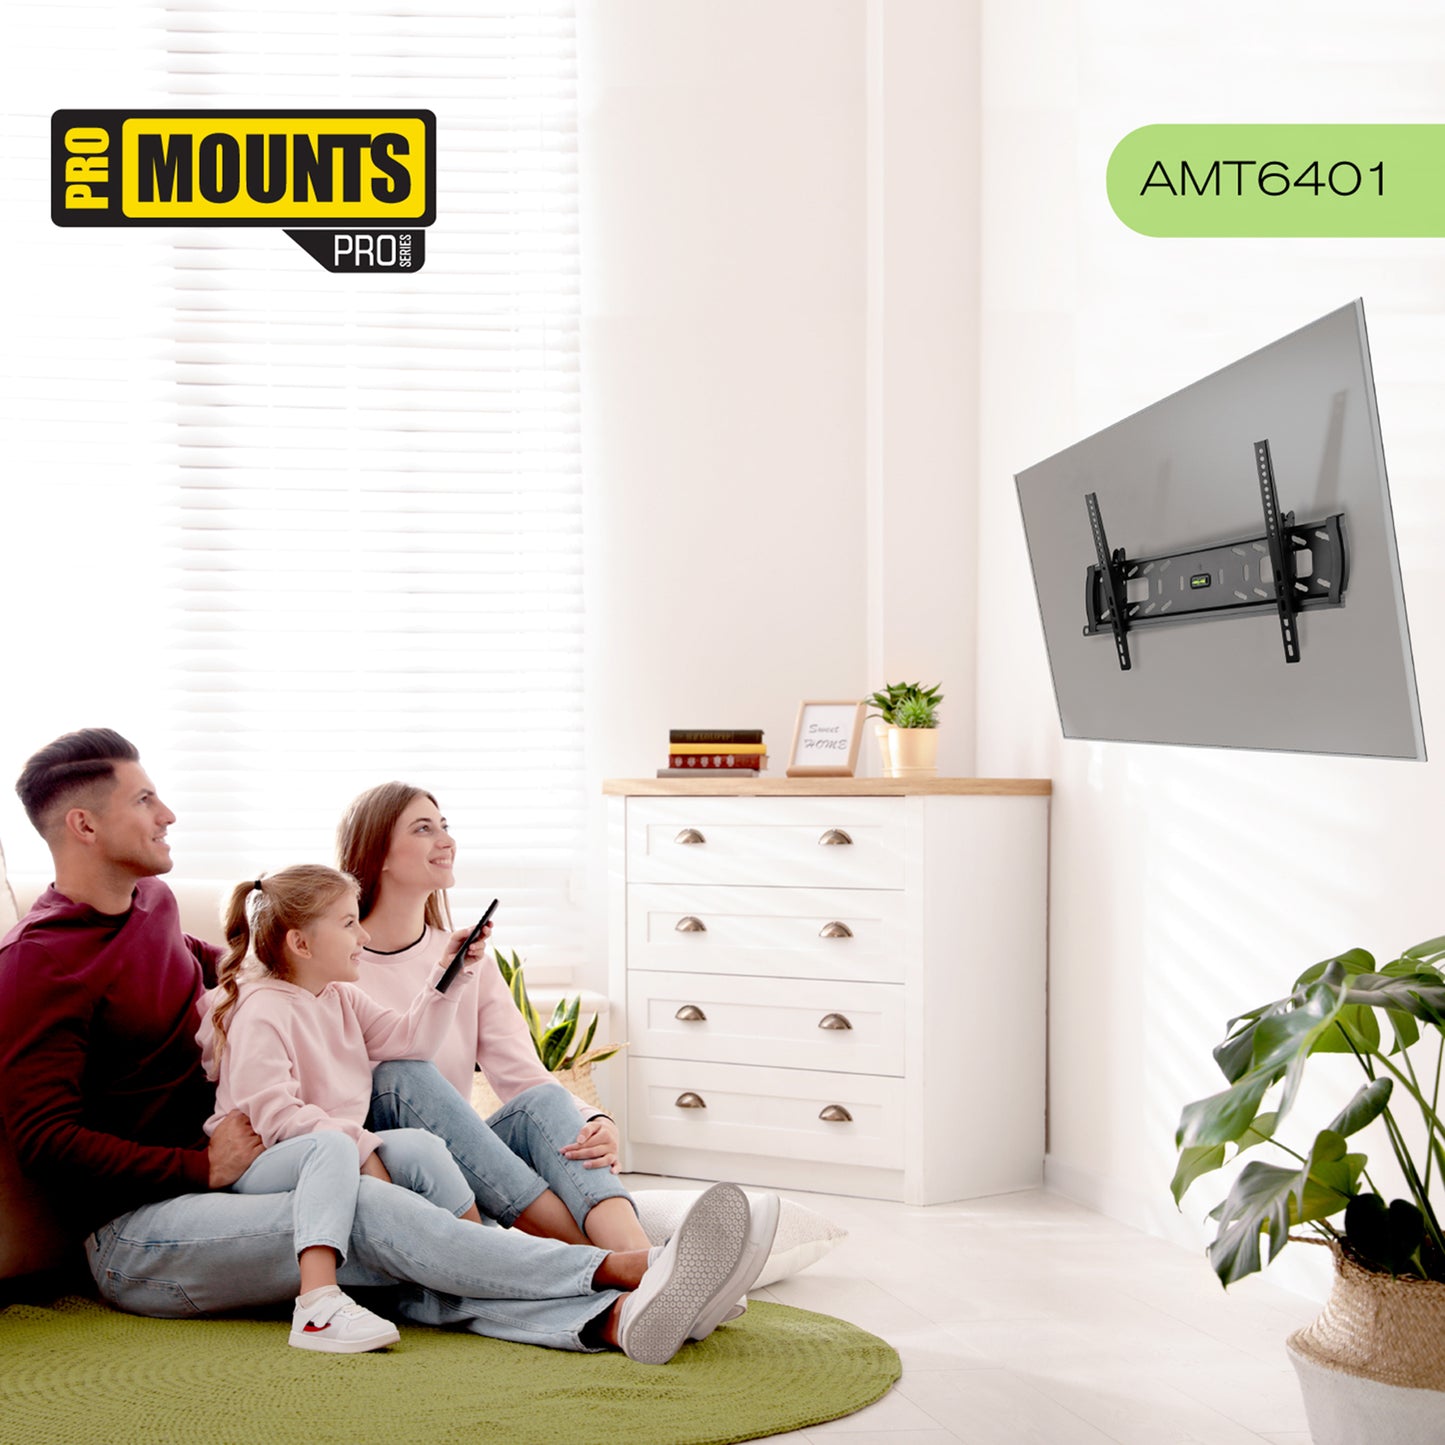 ProMounts Tilting TV Wall Mount for 40" to 75" TVs Holds up to 150Ibs (AMT6401)